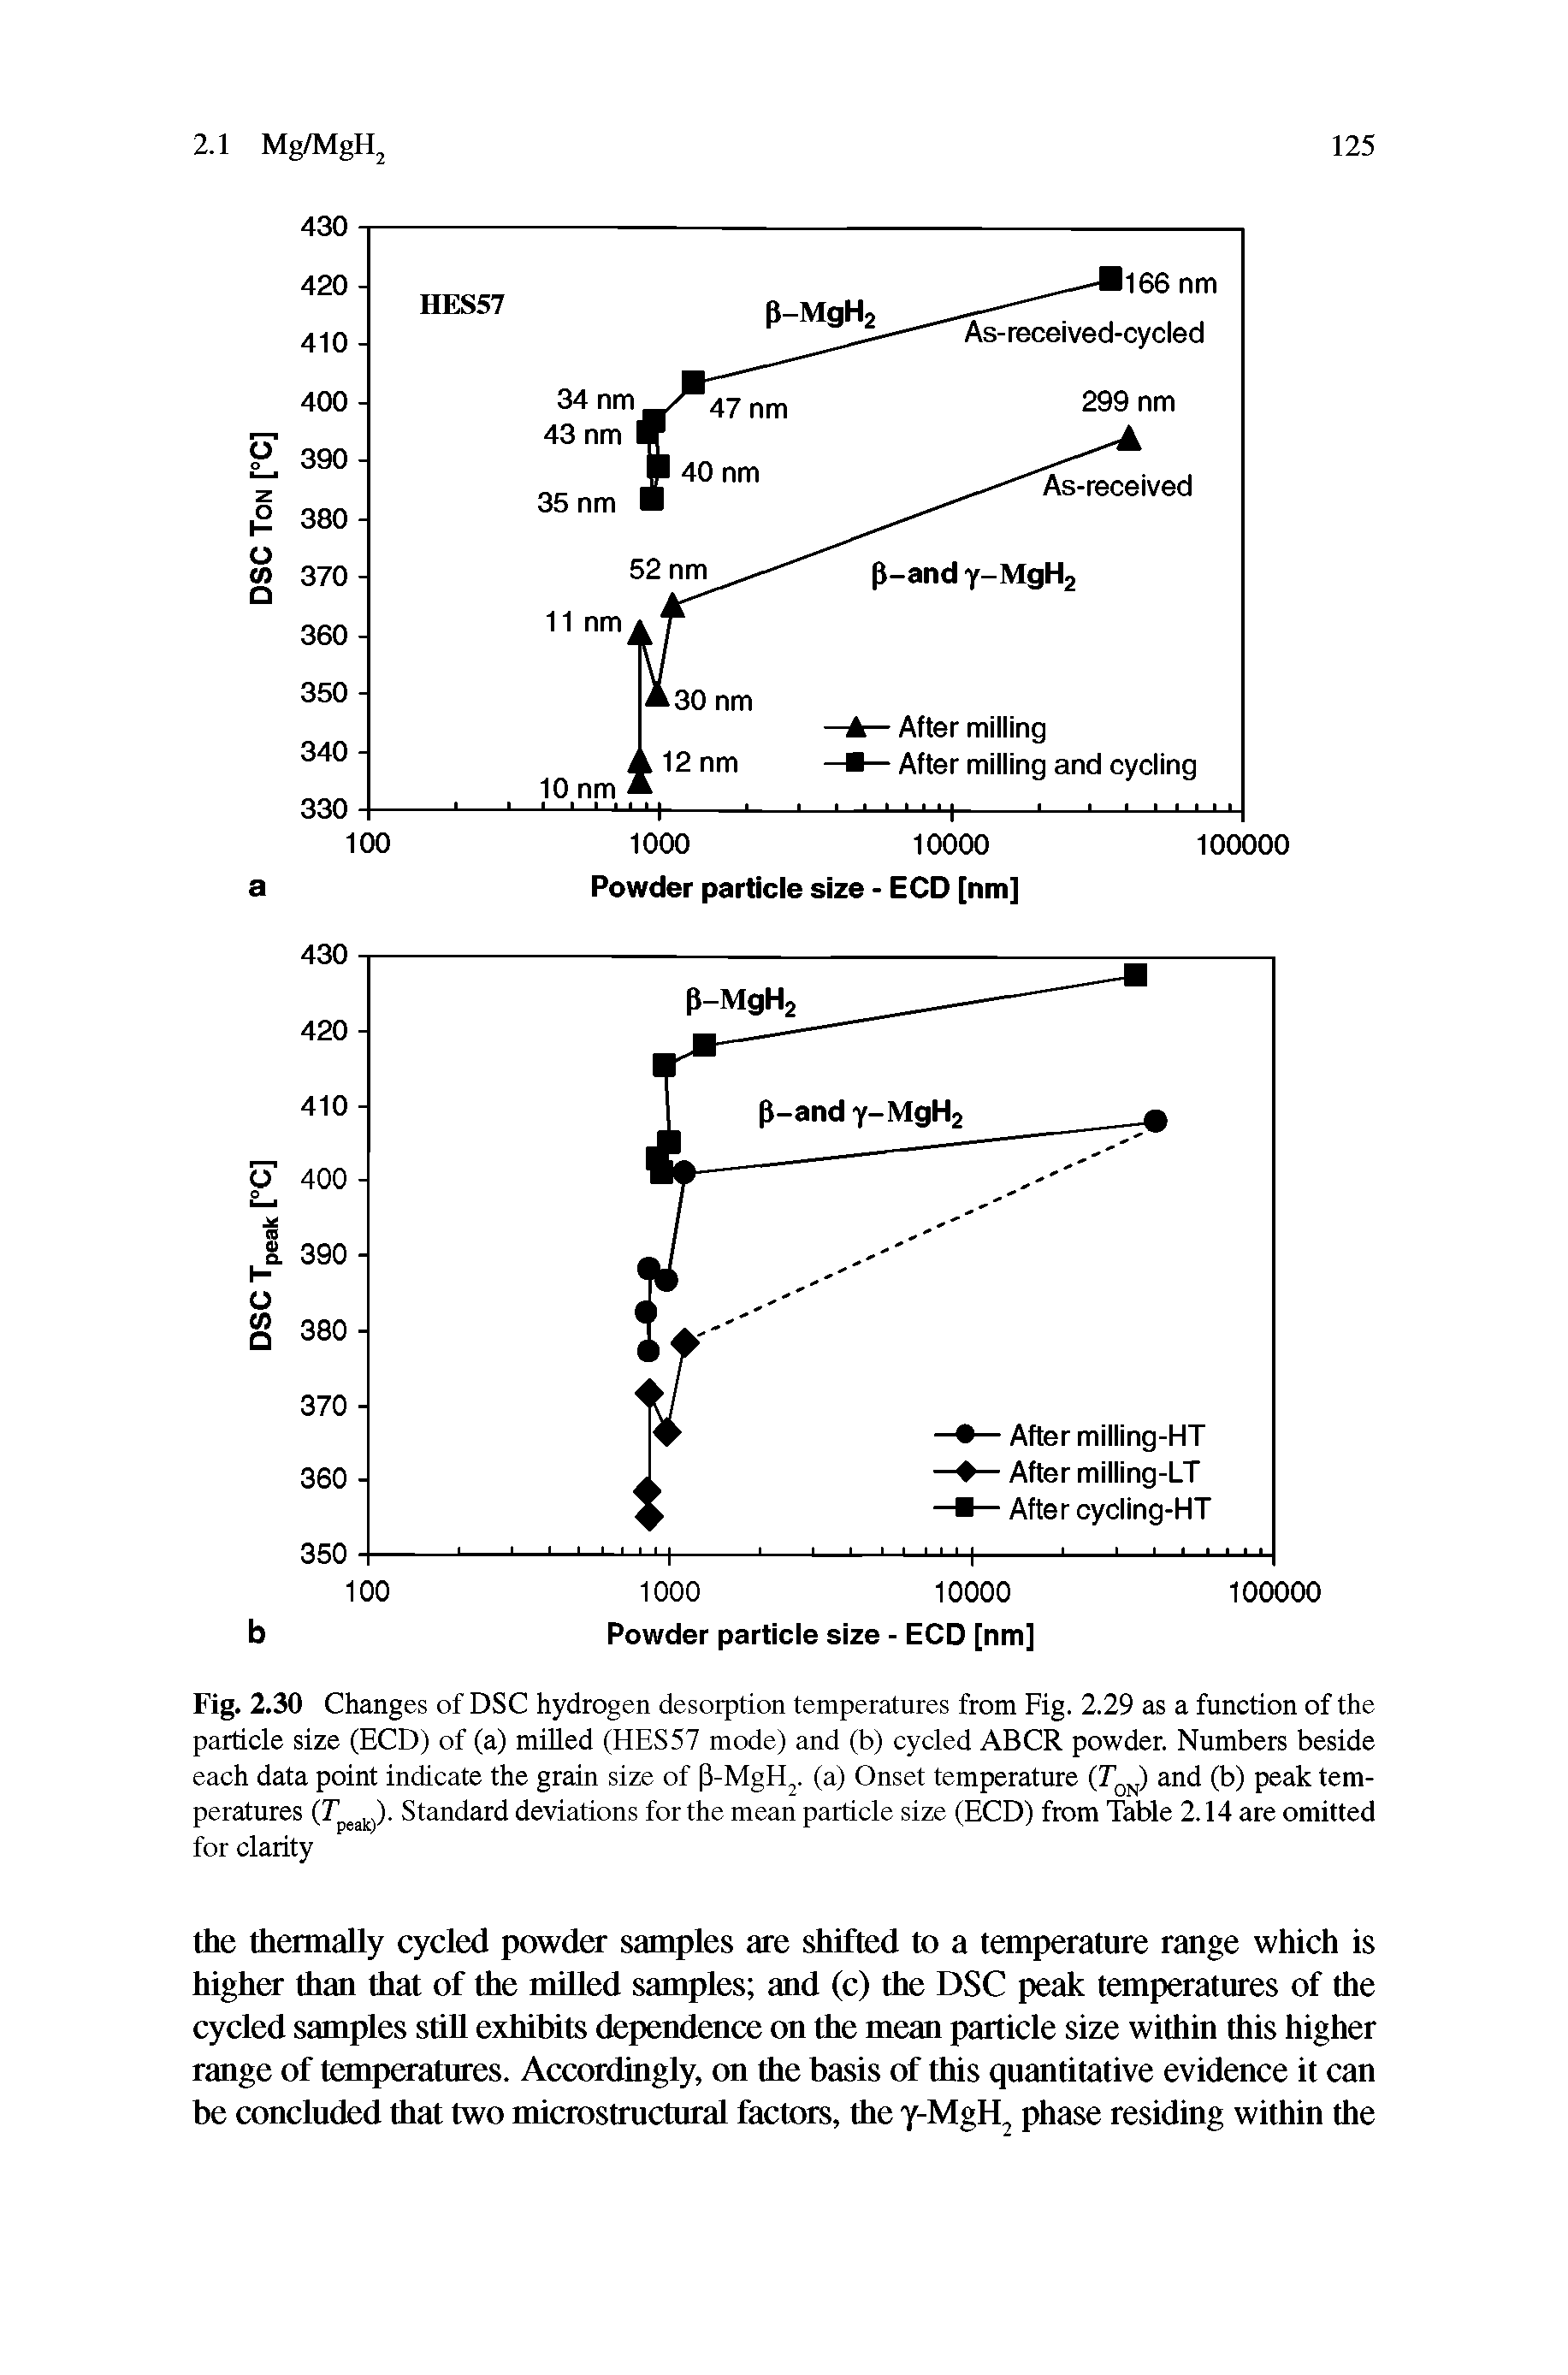 Fig. 2.30 Changes of DSC hydrogen desorption temperatures from Fig. 2.29 as a function of the particle size (BCD) of (a) miUed (HES57 mode) and (b) cycled ABCR powder. Numbers beside each data point indicate the grain size of P-MgH. (a) Onset temperature (T ) and (b) peak temperatures Standard deviations for the mean particle size (BCD) from Table 2.14 are omitted...